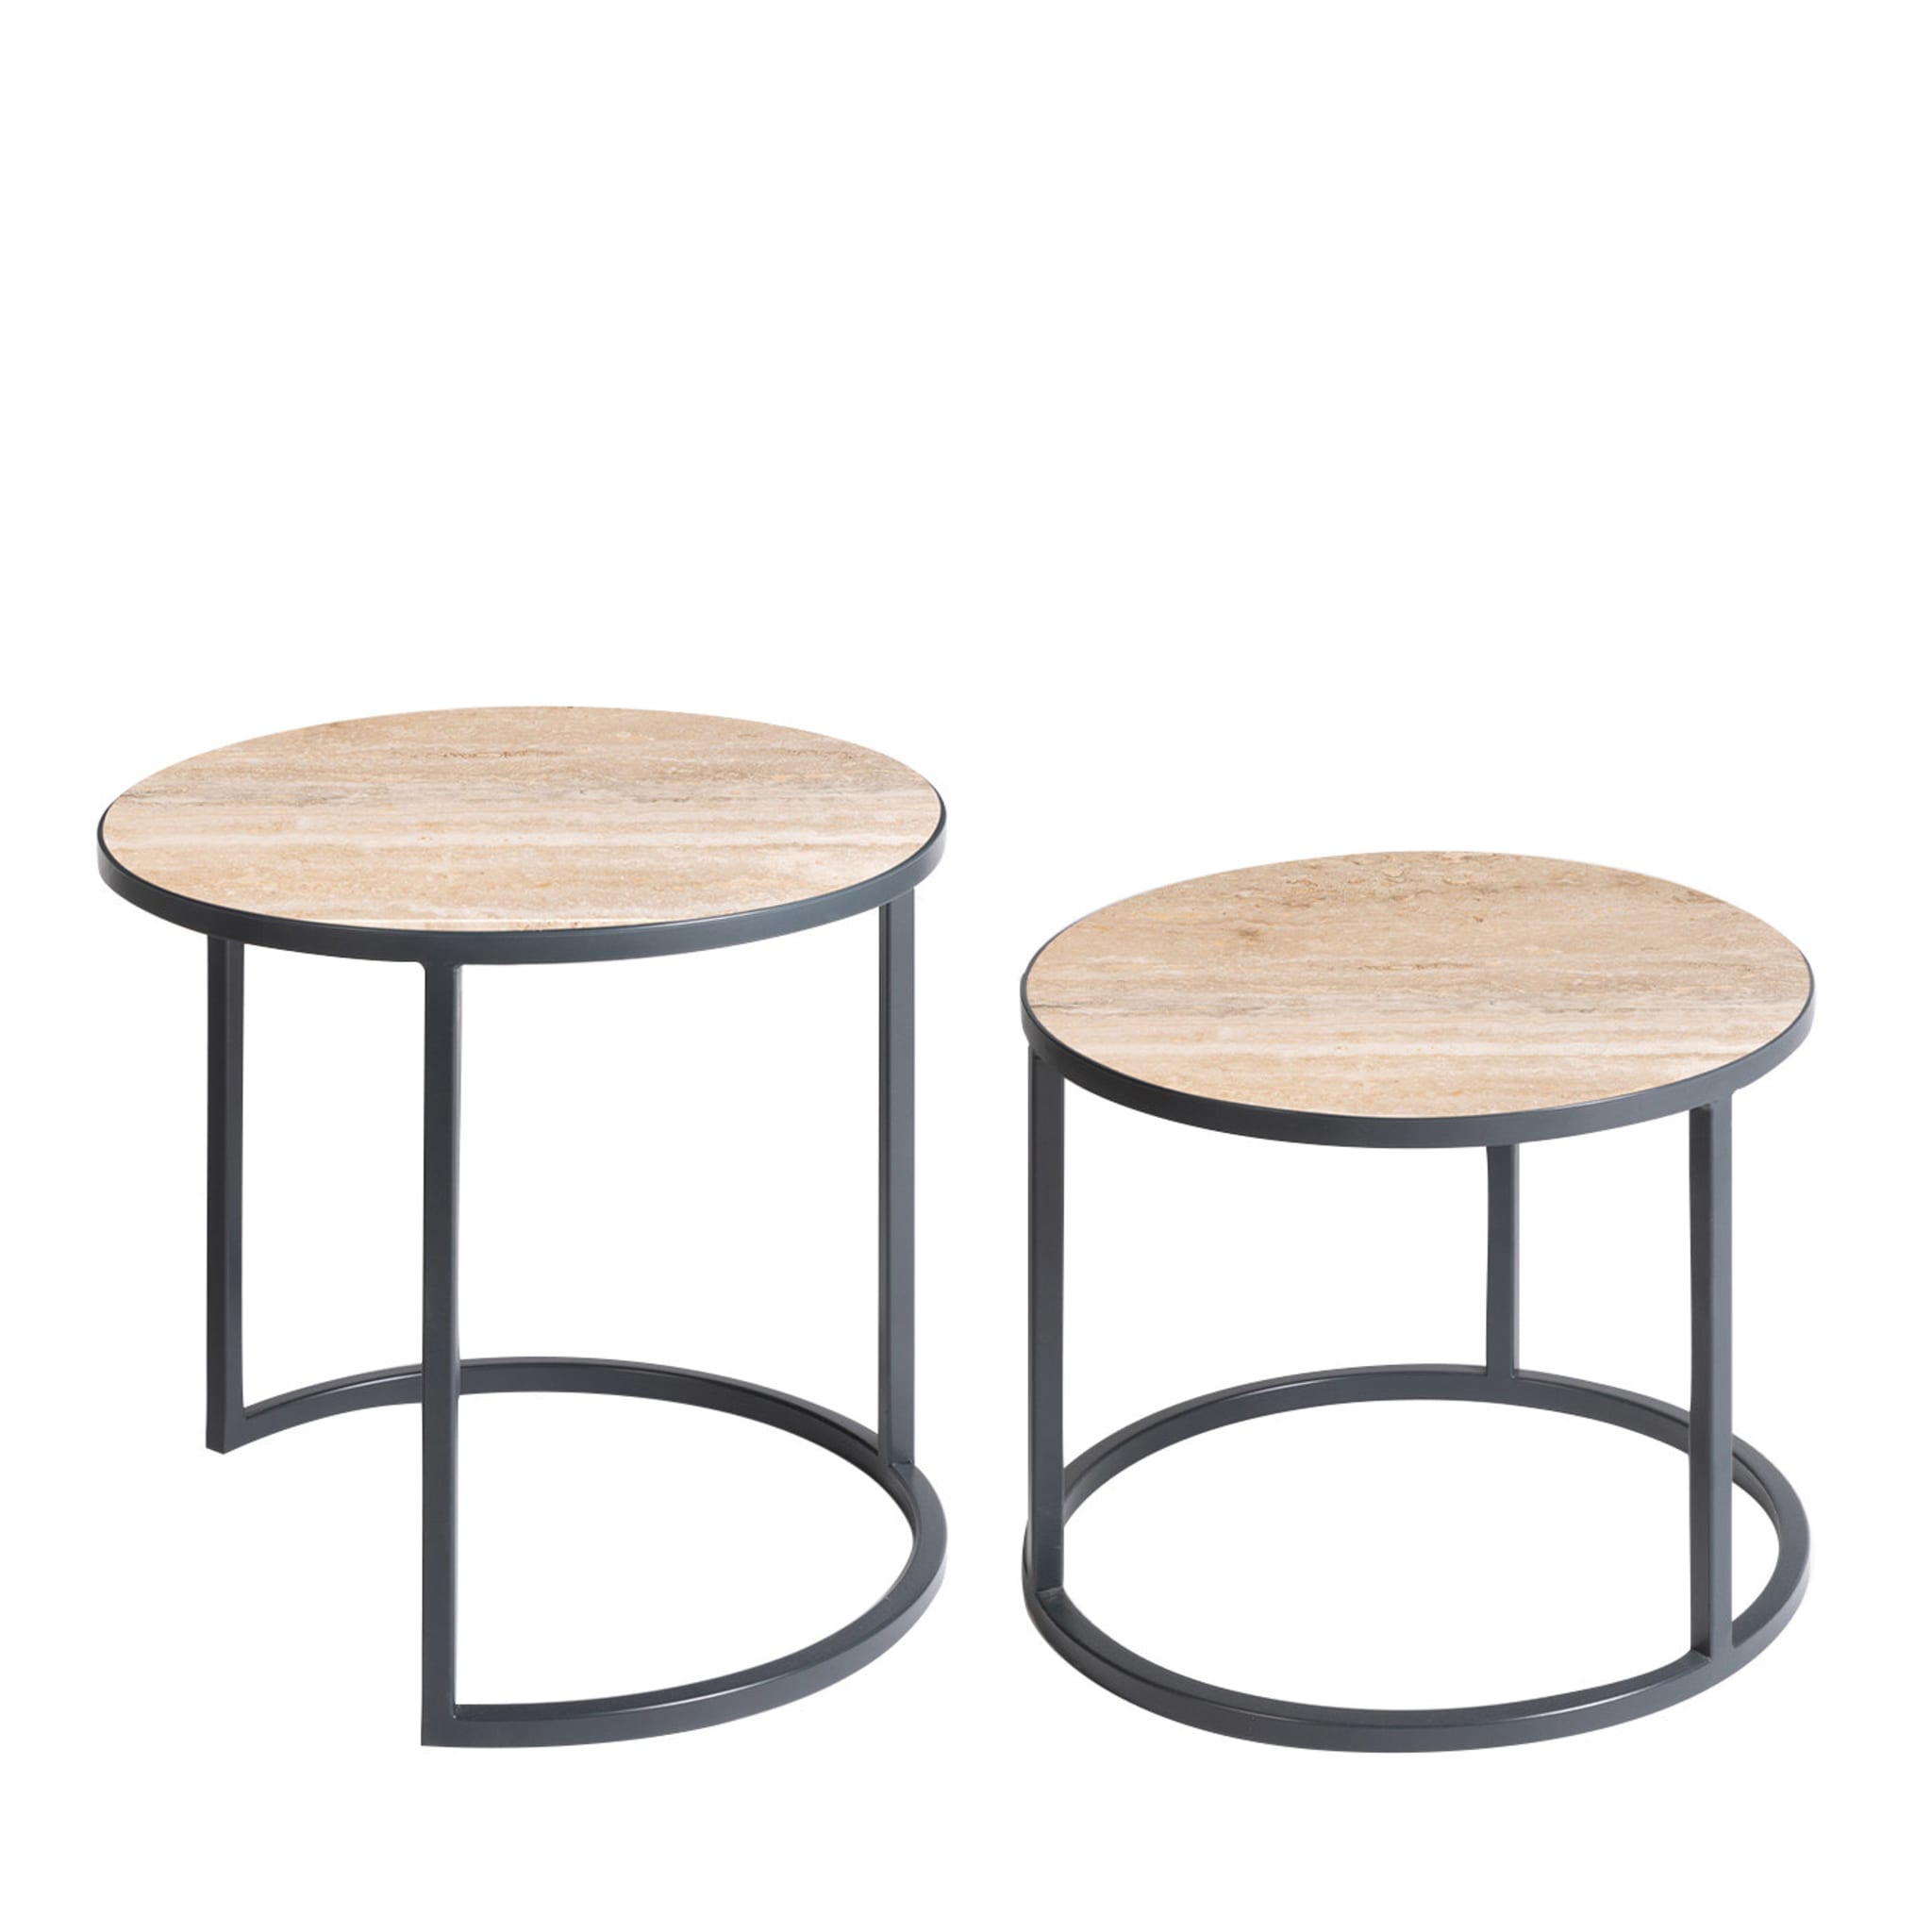 Alicudi and Filicudi Travertine Set of 2 Coffee Tables - Main view